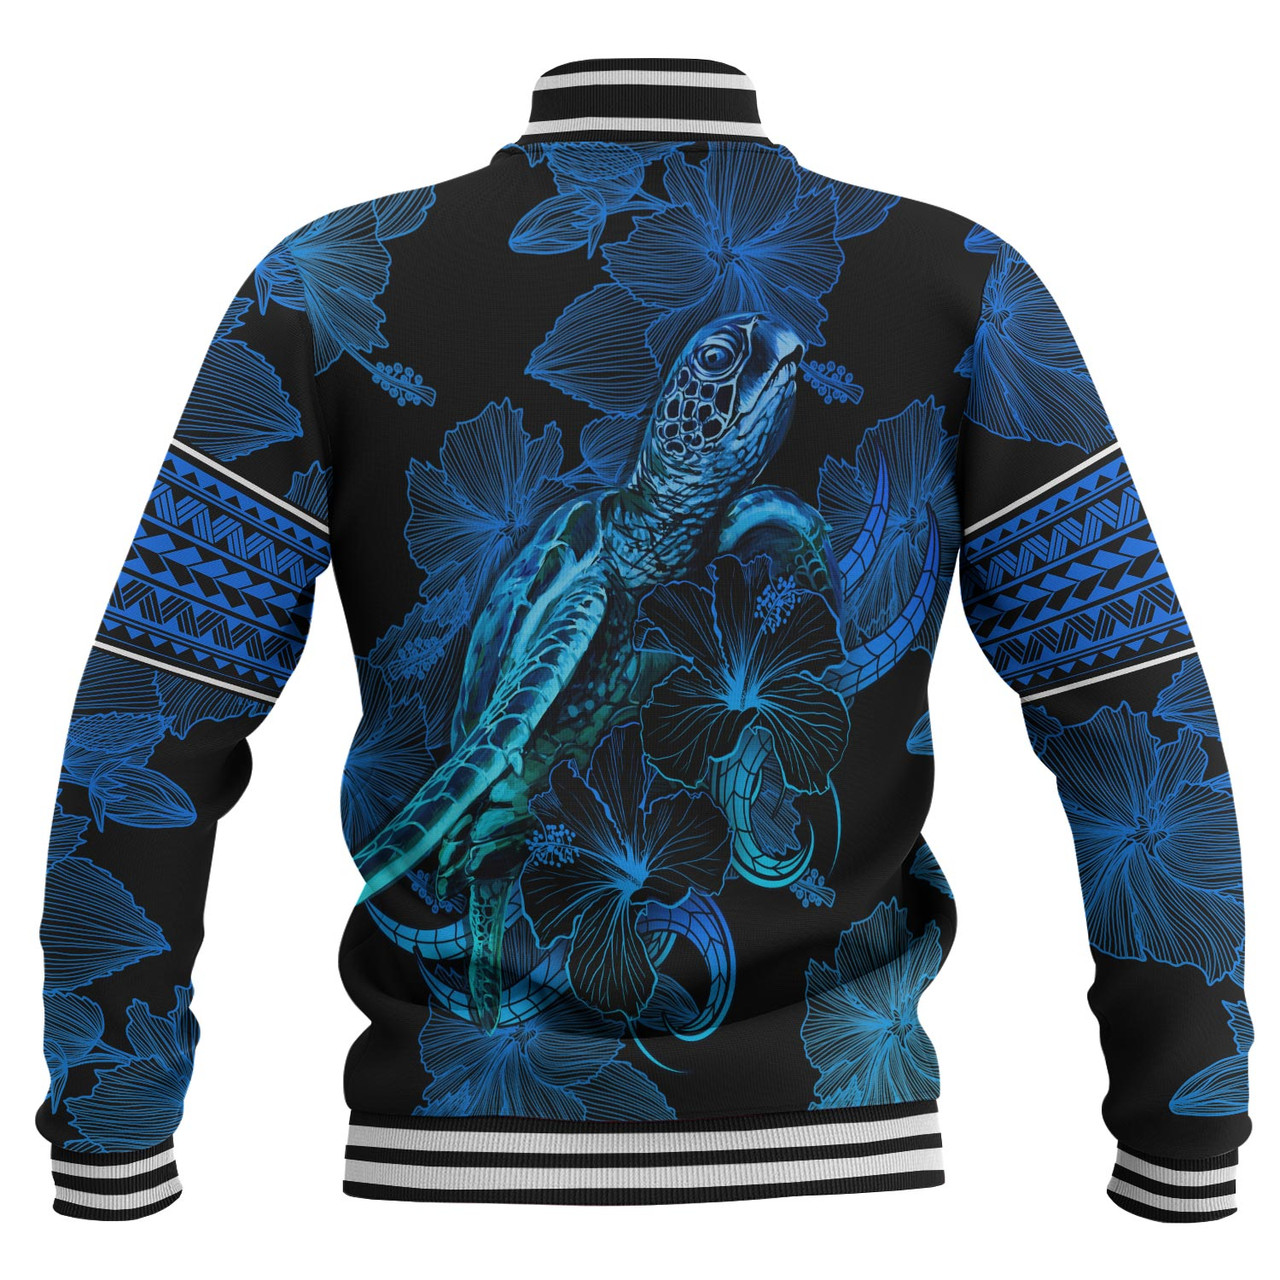 Papua New Guinea Baseball Jacket Sea Turtle With Blooming Hibiscus Flowers Tribal Blue